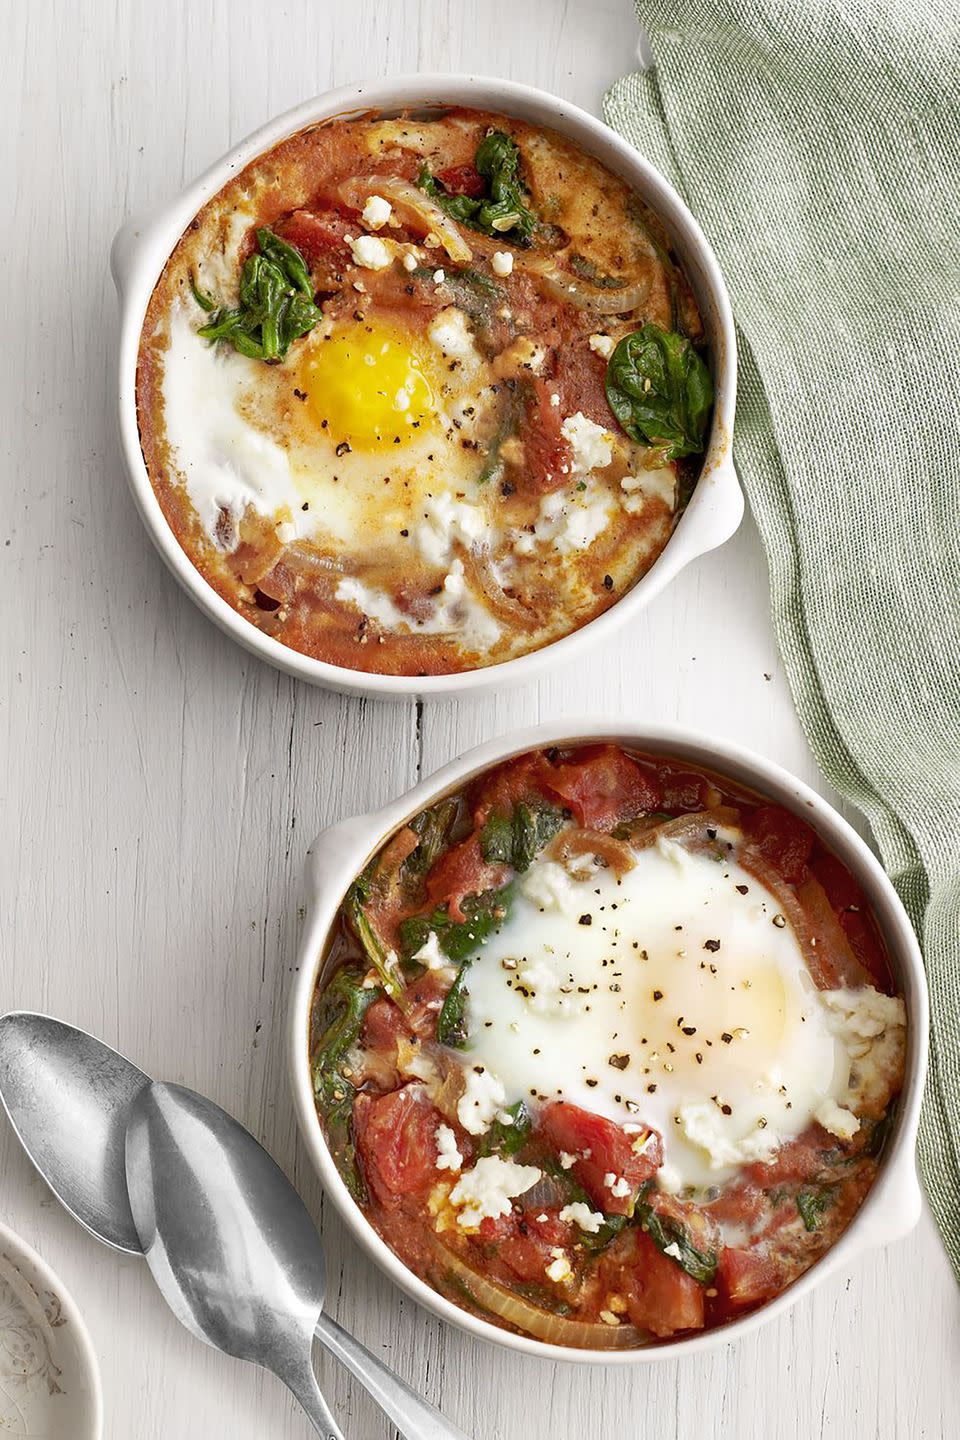 breakfast in bed baked eggs with spinach and tomato in bowls on table